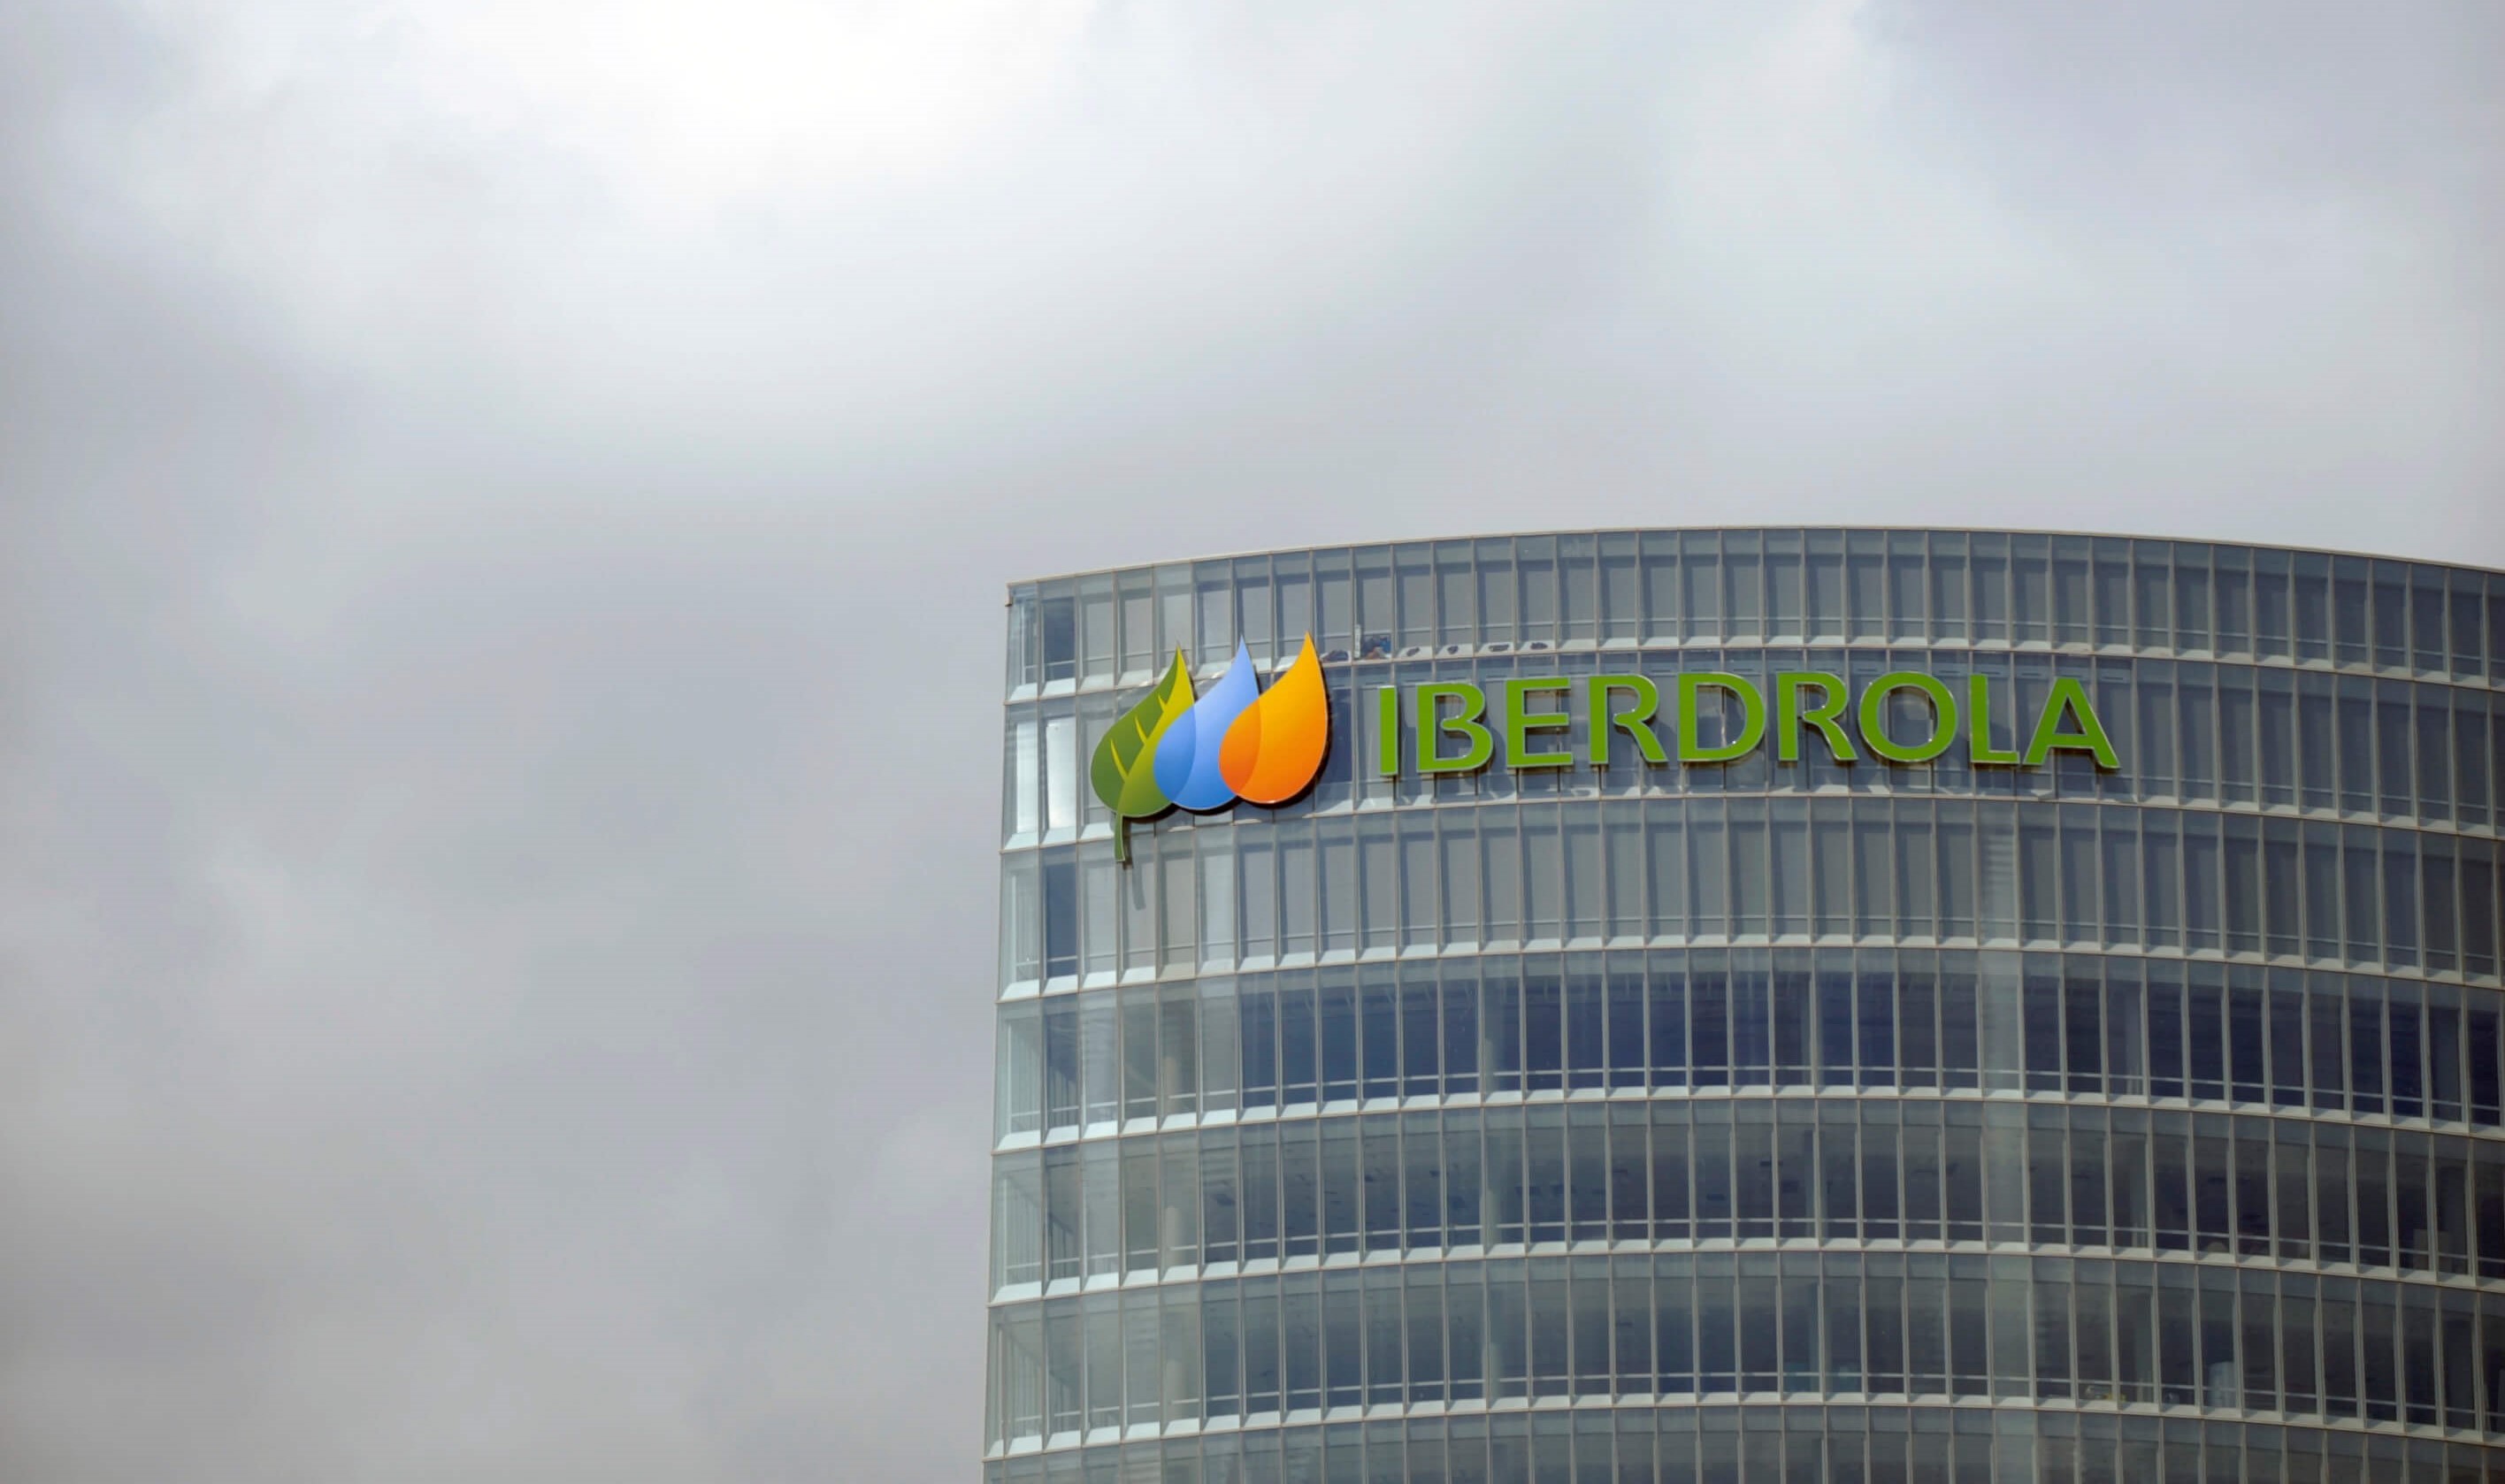 Iberdrola headquarters in Bilbao, Spain, photo showing upper part of the building with company logo